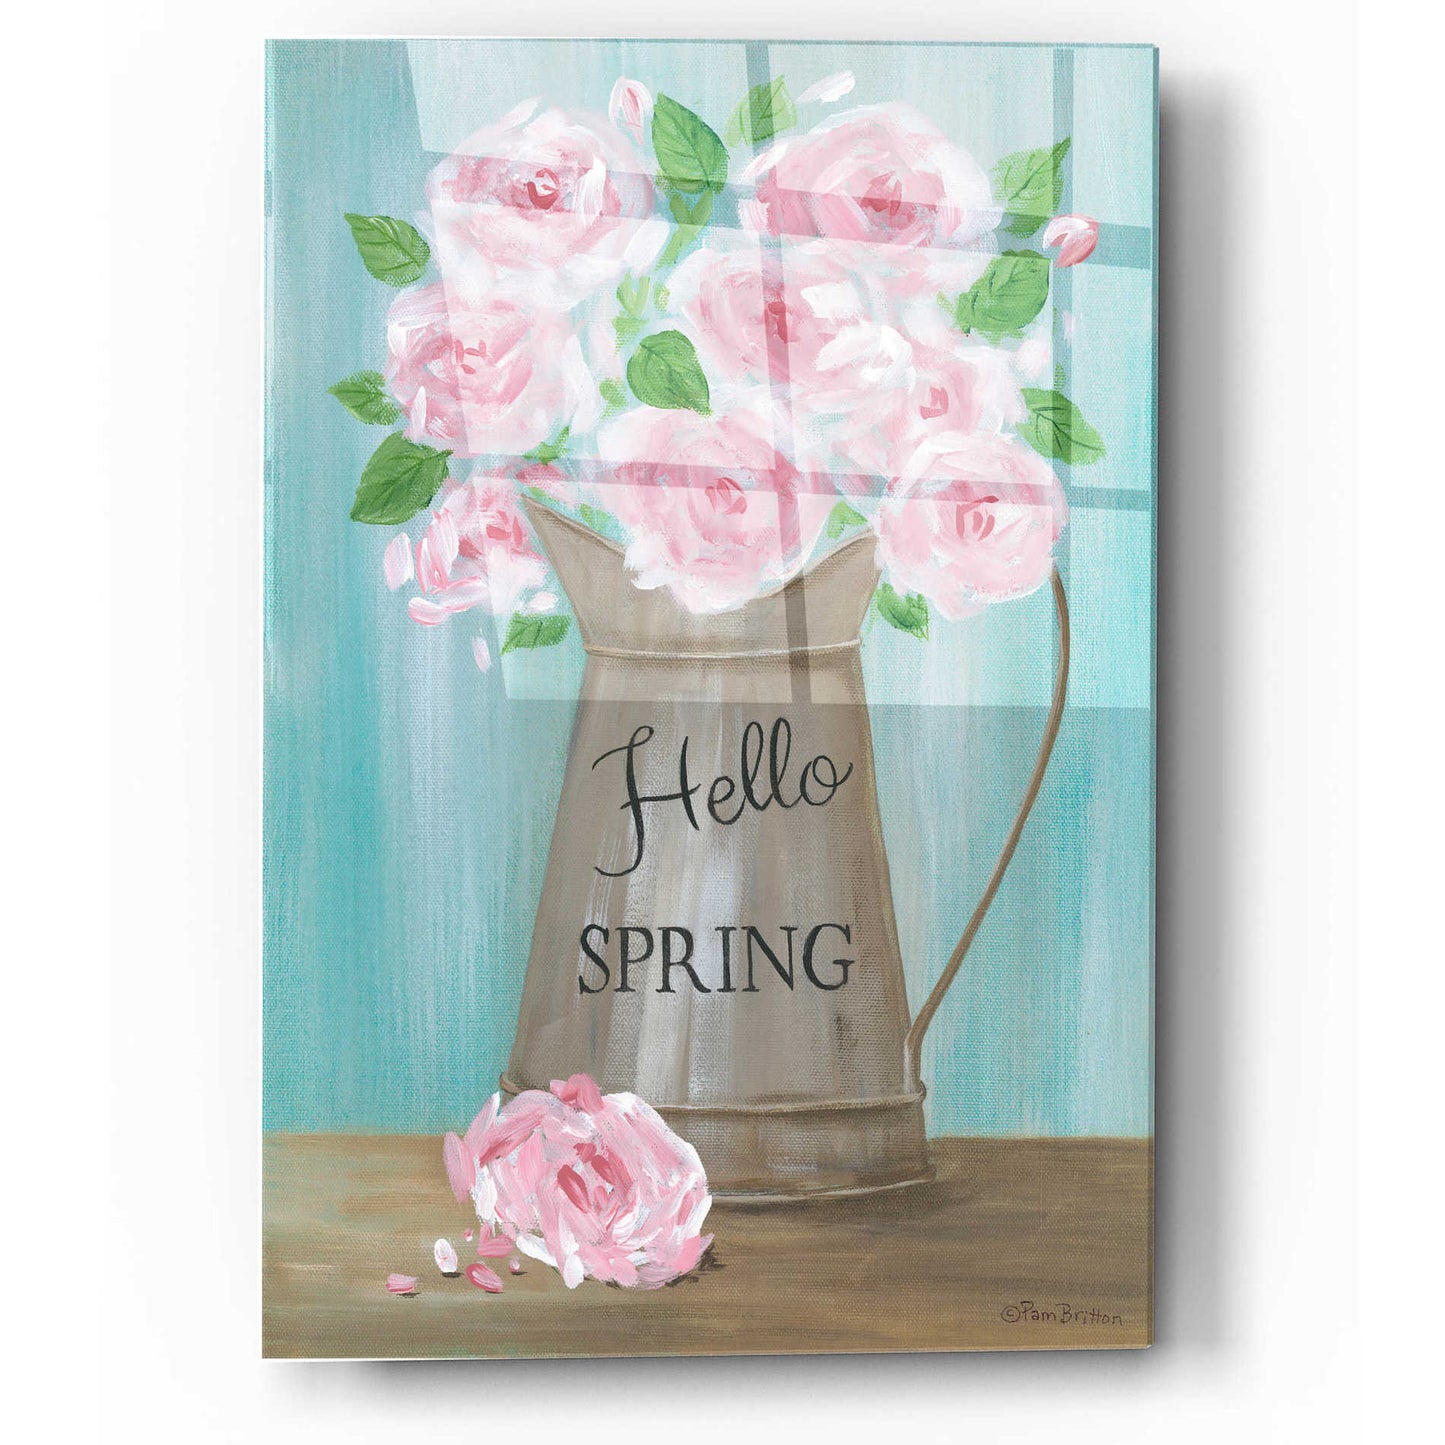 Epic Art 'Hello Spring Roses' by Pam Britton, Acrylic Glass Wall Art